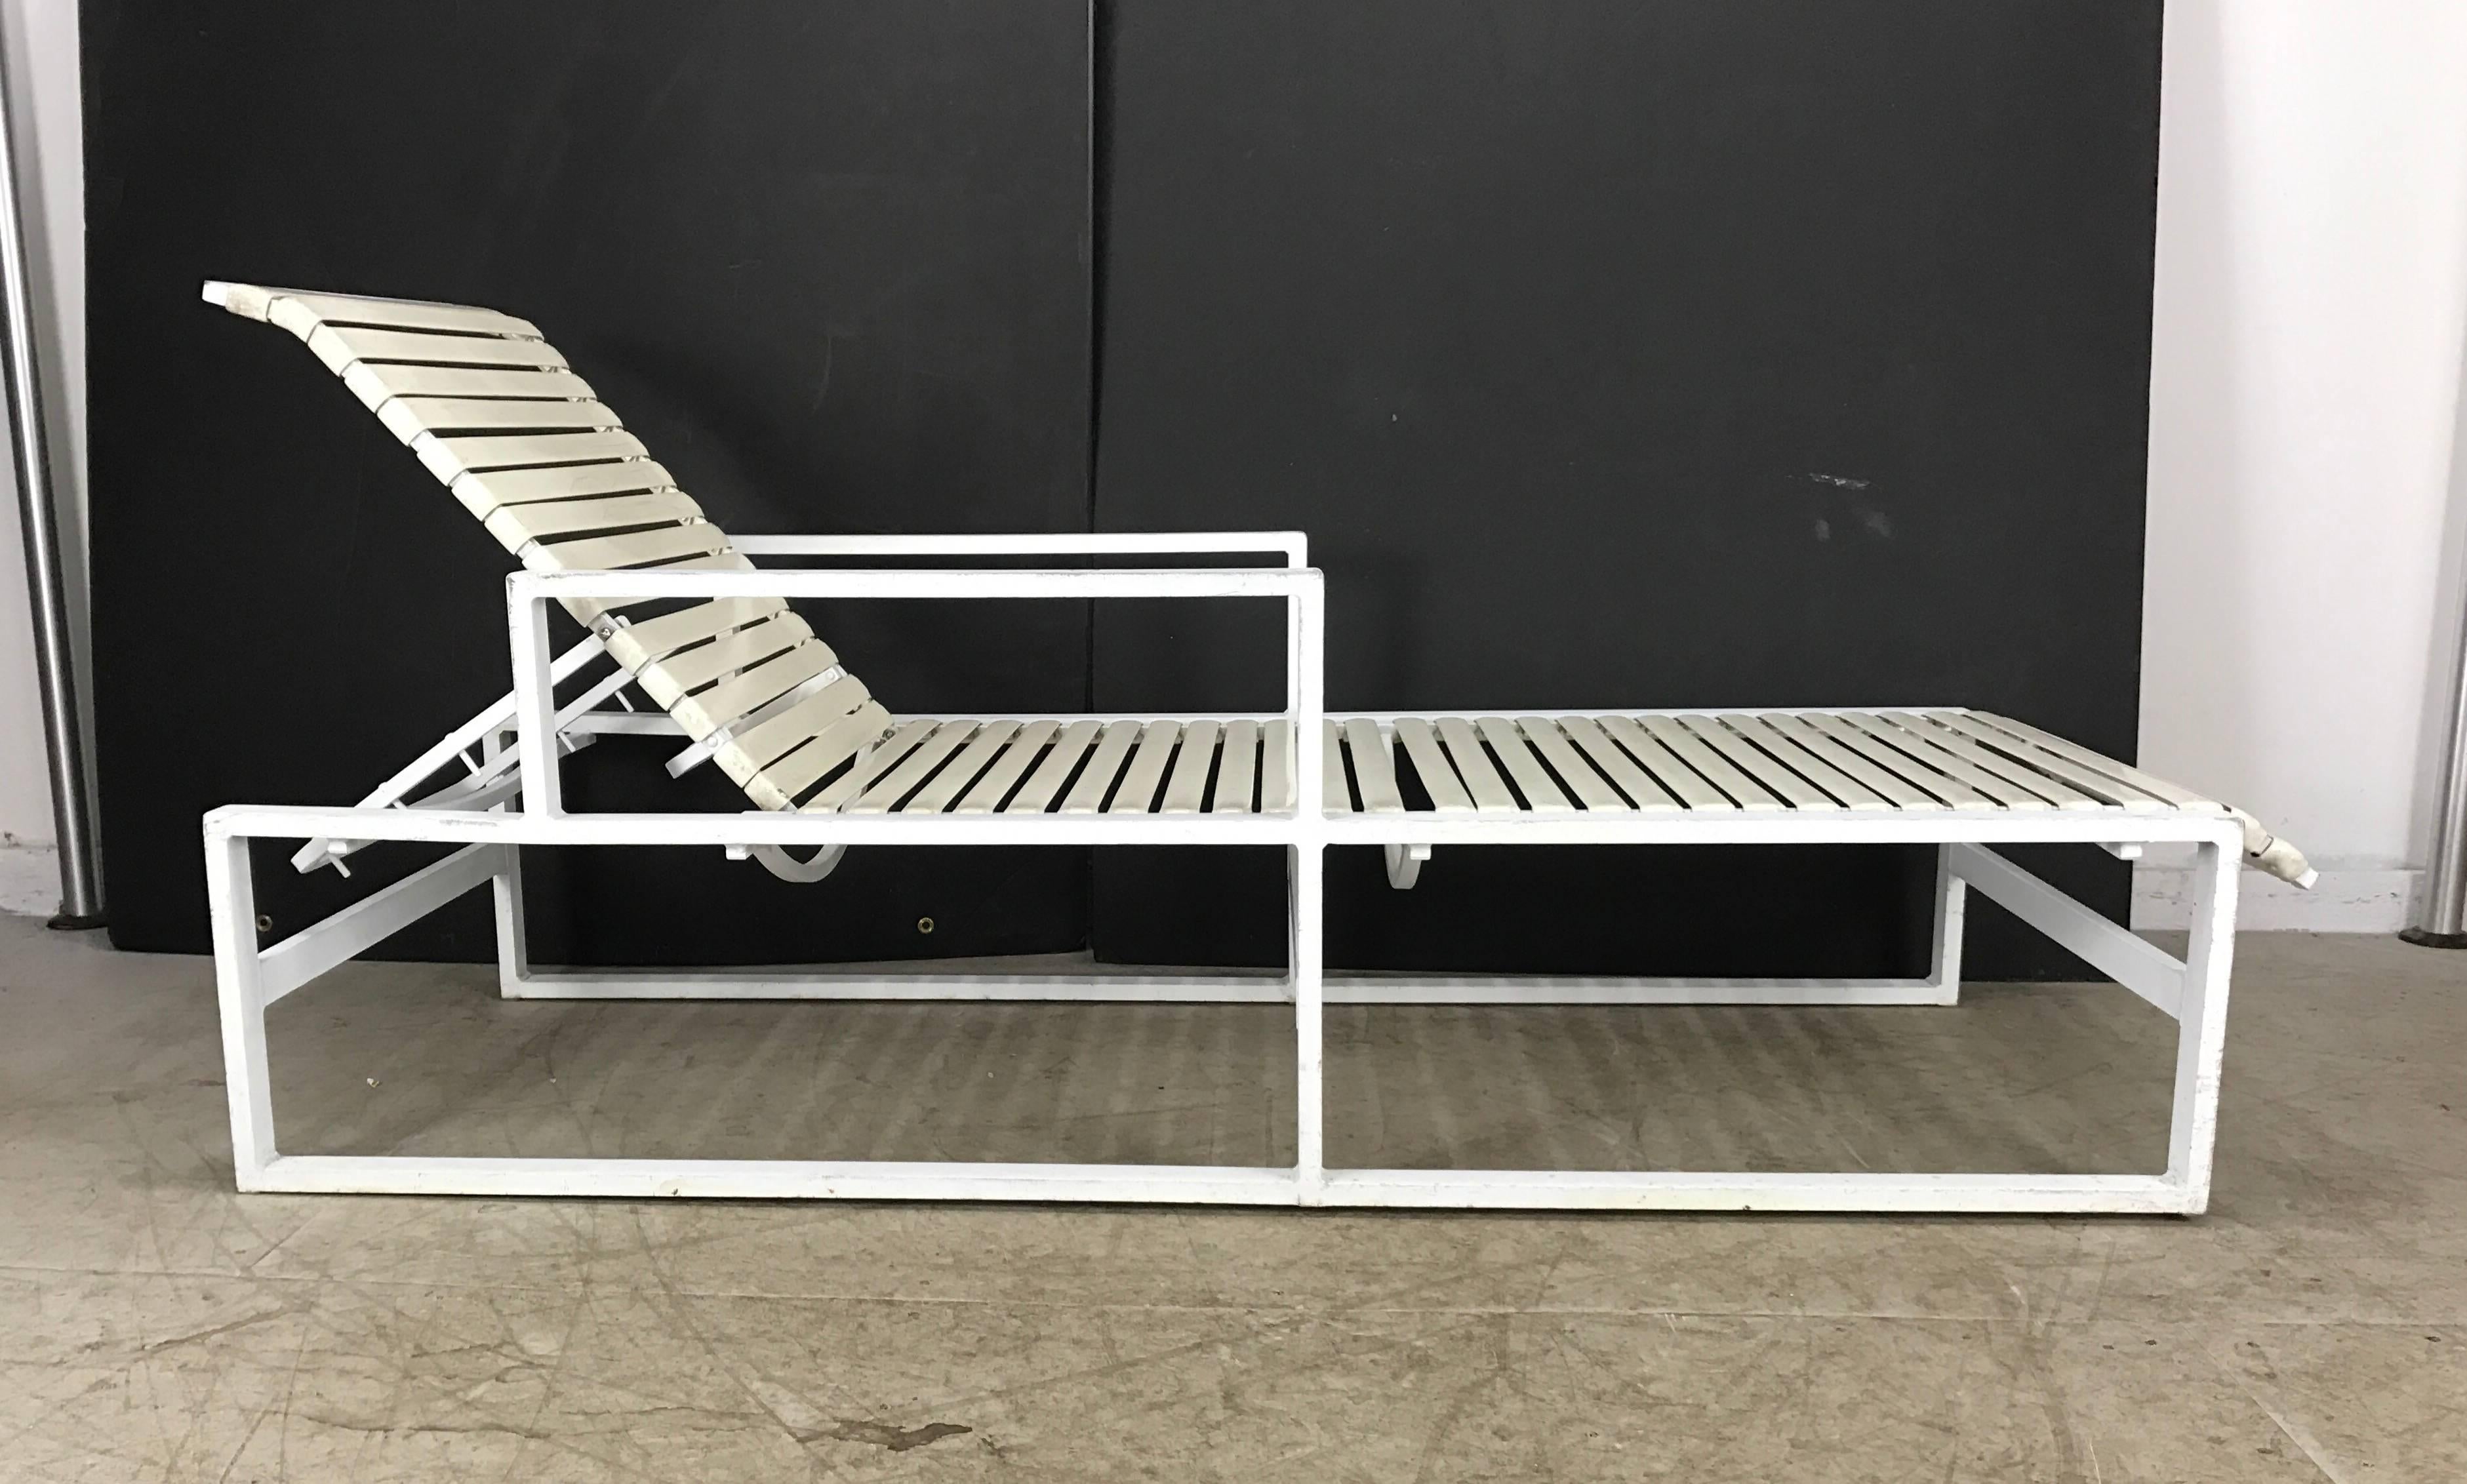 Pair modernist architectural pool side/garden chaise longue's, commercial grade/quality, powder coated aluminum frames, vinyl strapping, four position back. Wonderful sculptural design.